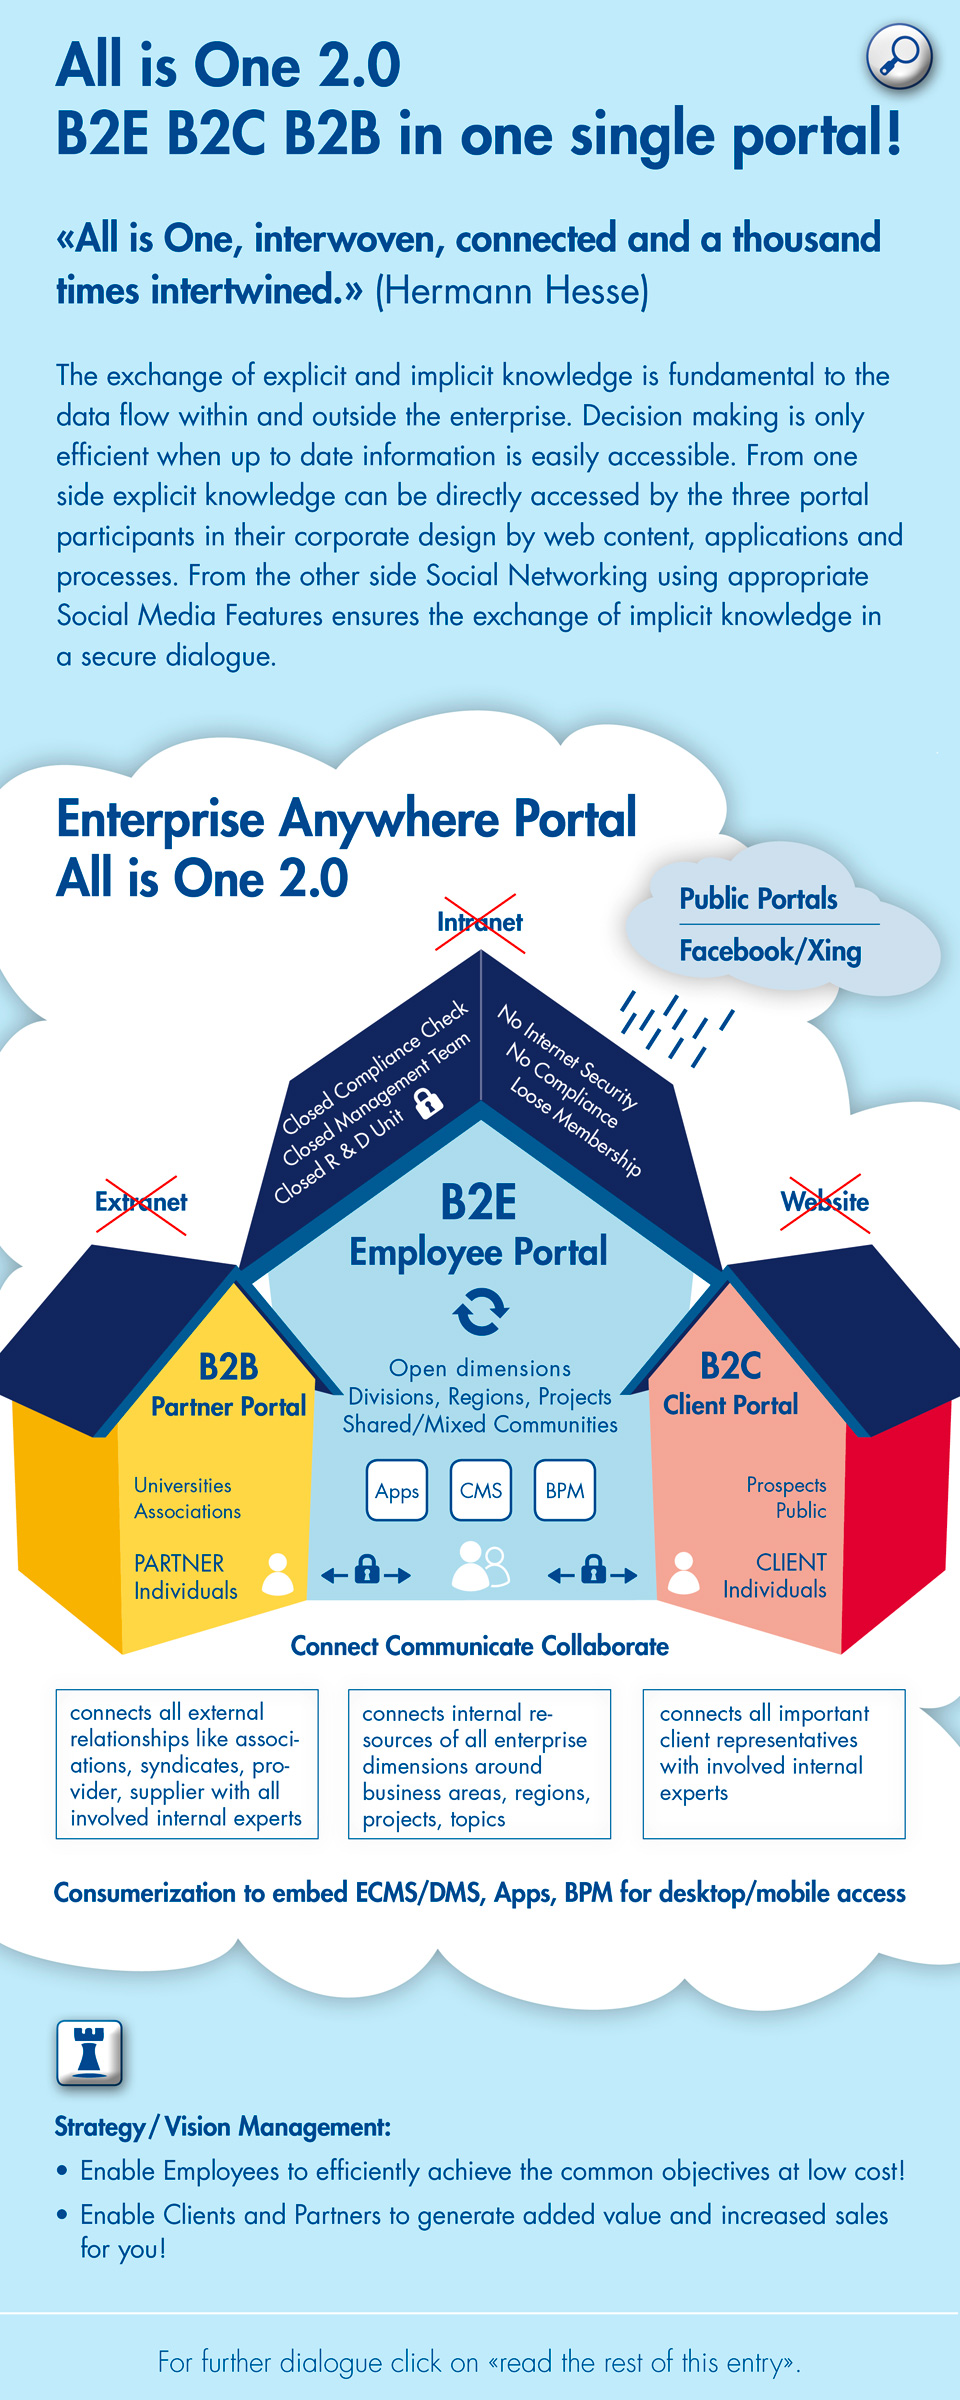 All is One 2.0 - B2E intranet, B2C website and B2B extranet in one portal! Ideal for Social Business, Social Networking, Social Media, Enterprise Portal, Communication, Cloud Computing.